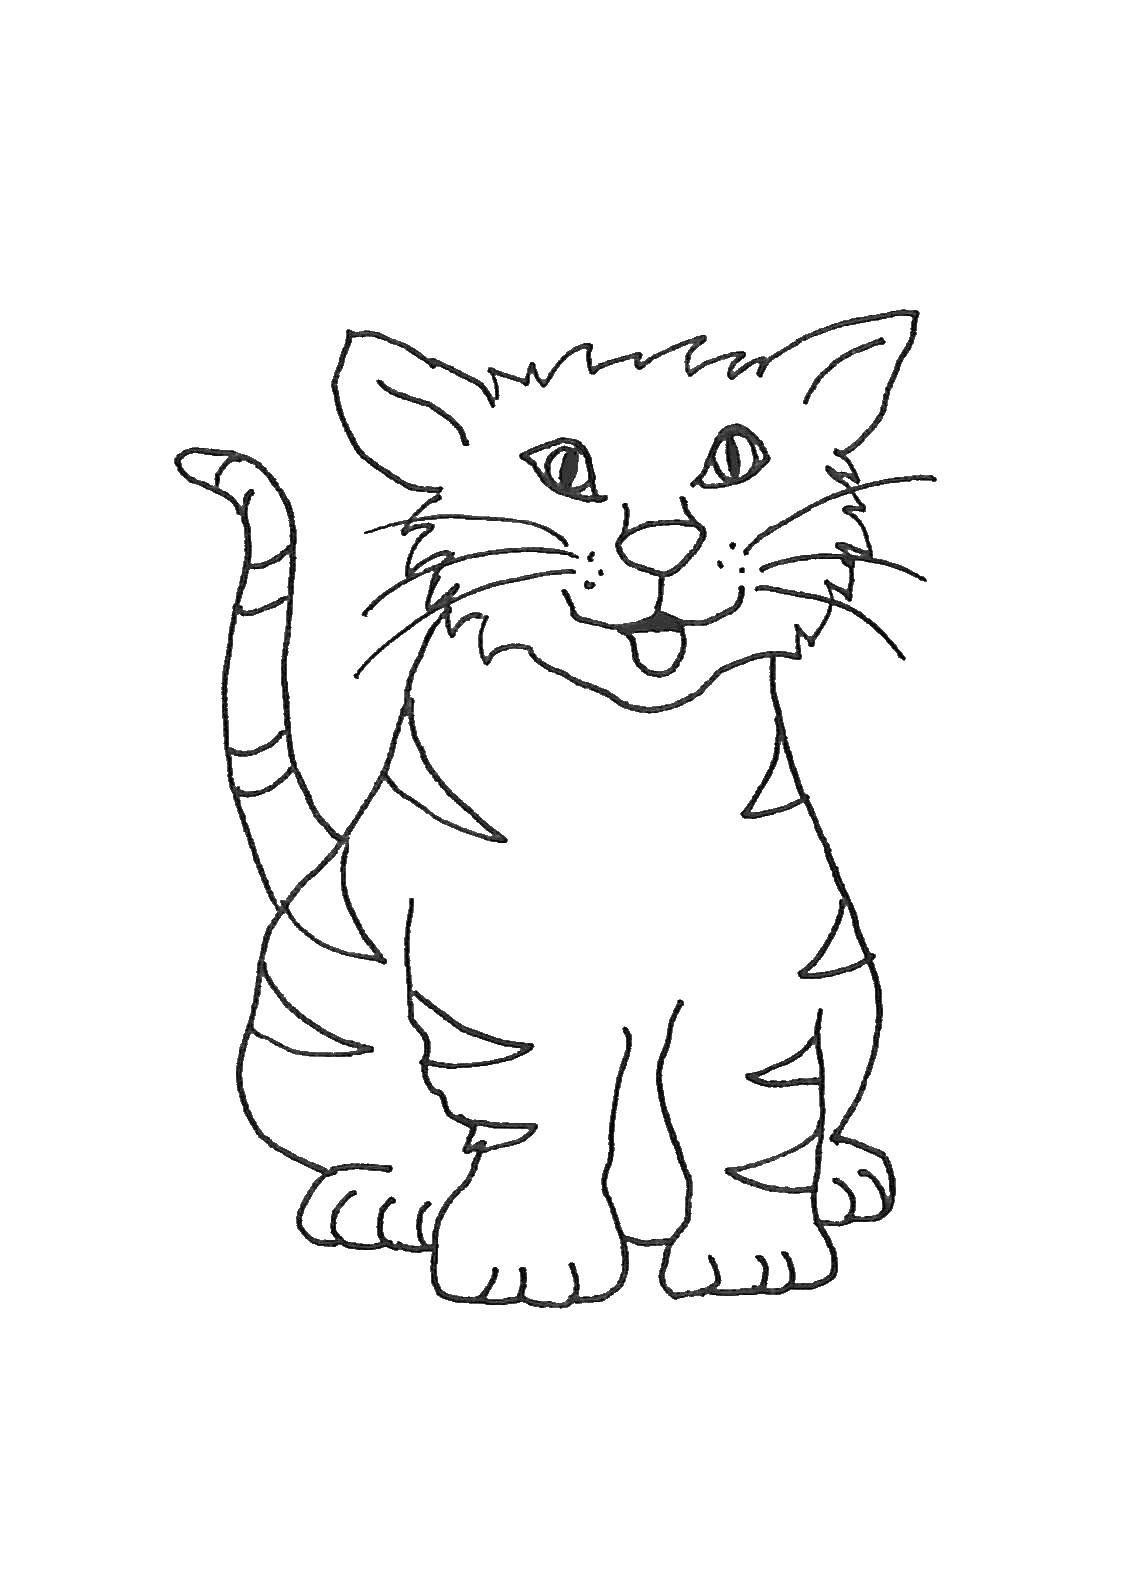 Coloring Tabby cat. Category Cats and kittens. Tags:  animals, kitten, cat, cat.